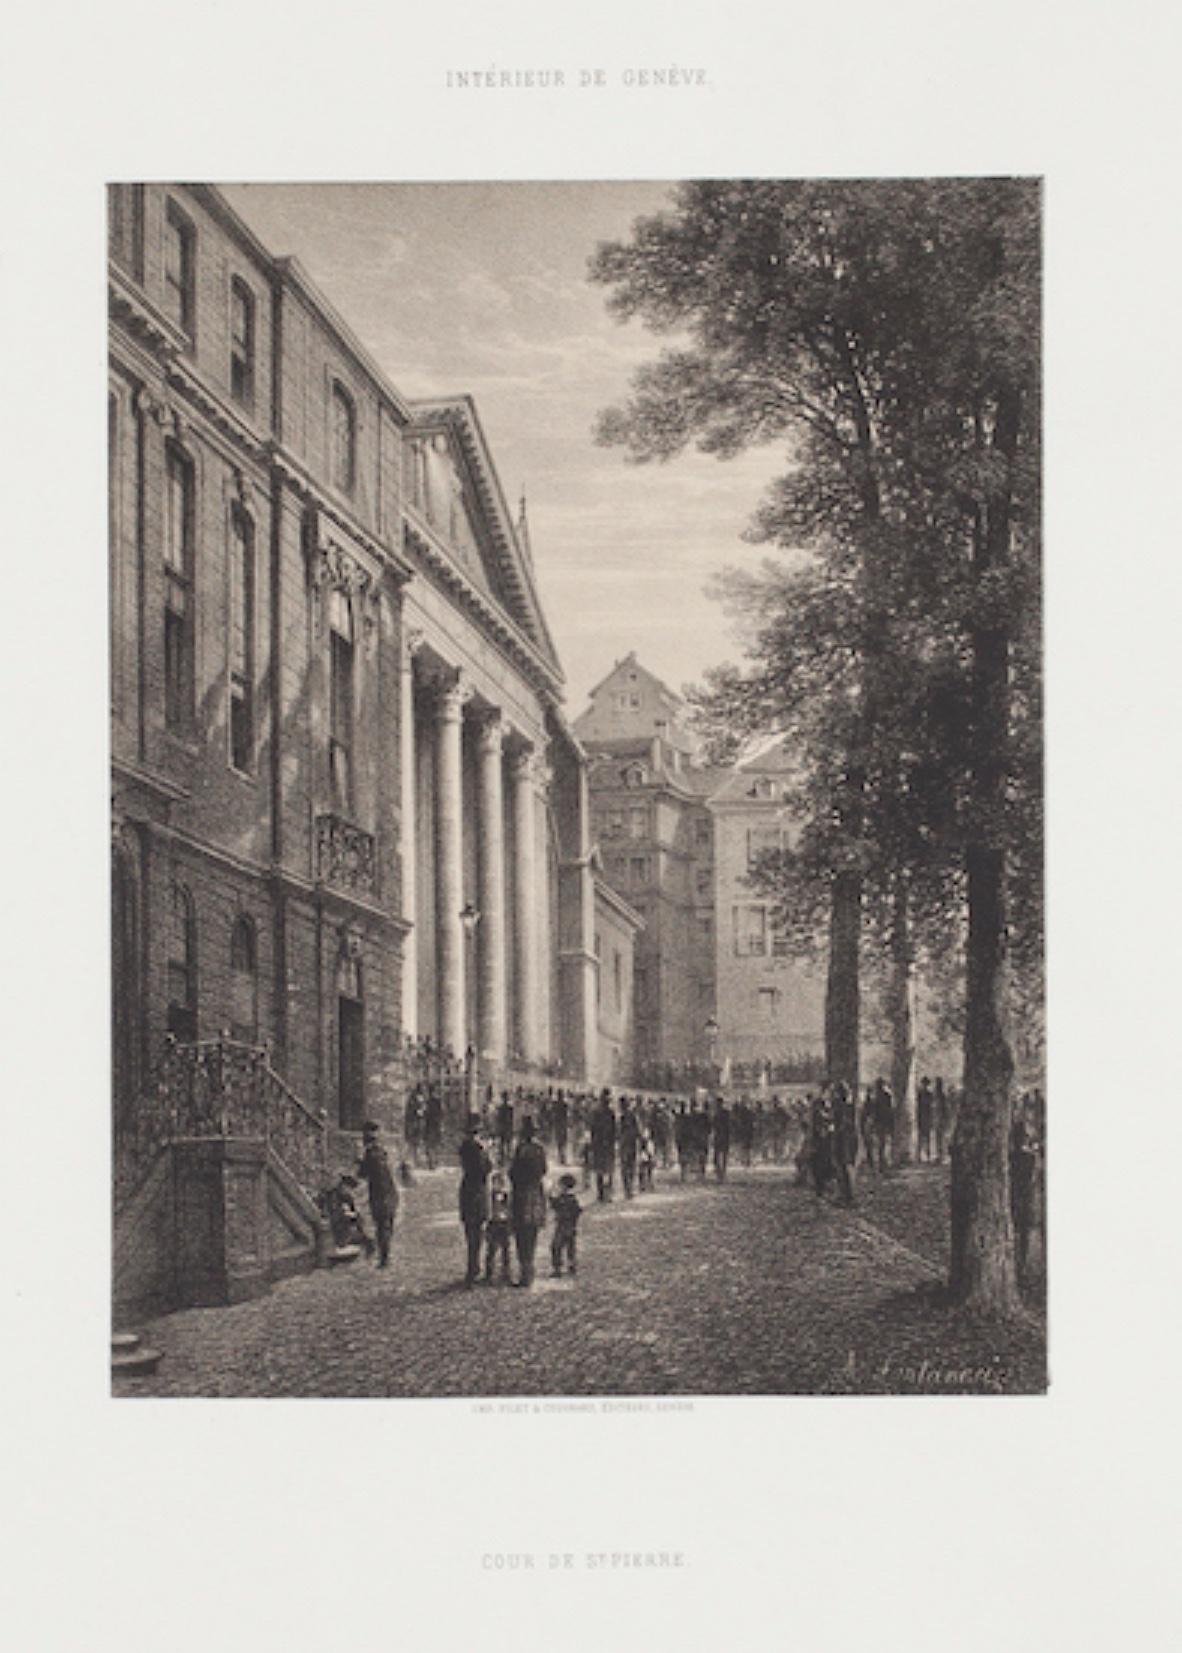 The Interior of Geneve is an original Lithograph by  Antonio Fontanesi in the 19th Century.

The state of preservation of the artwork is excellent. Image Dimensions:  19.8 x 15.5 cm

The signature is engraved on the plate the lower left. At the top